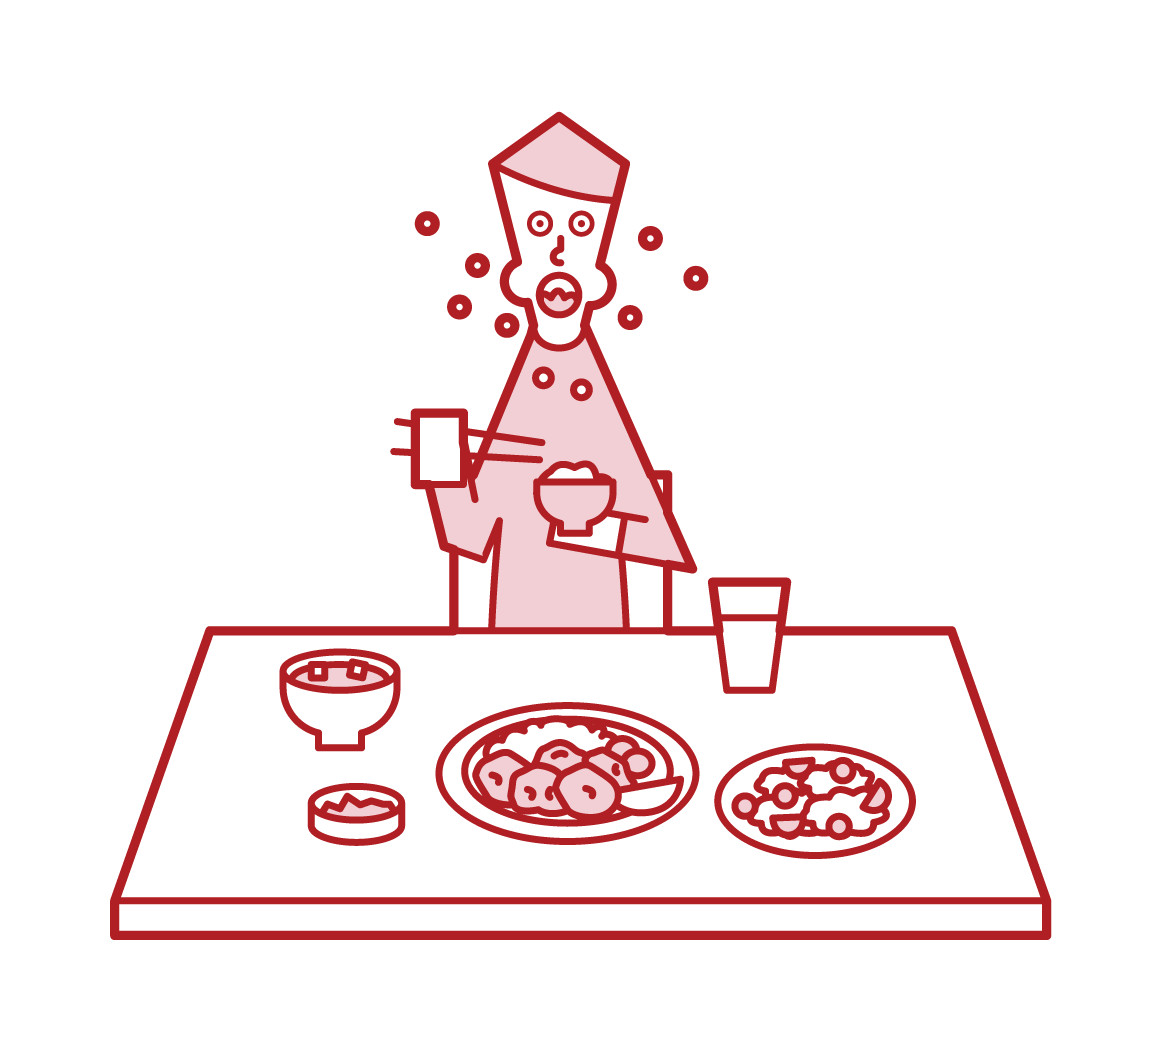 Illustration of a man eating in a hurry